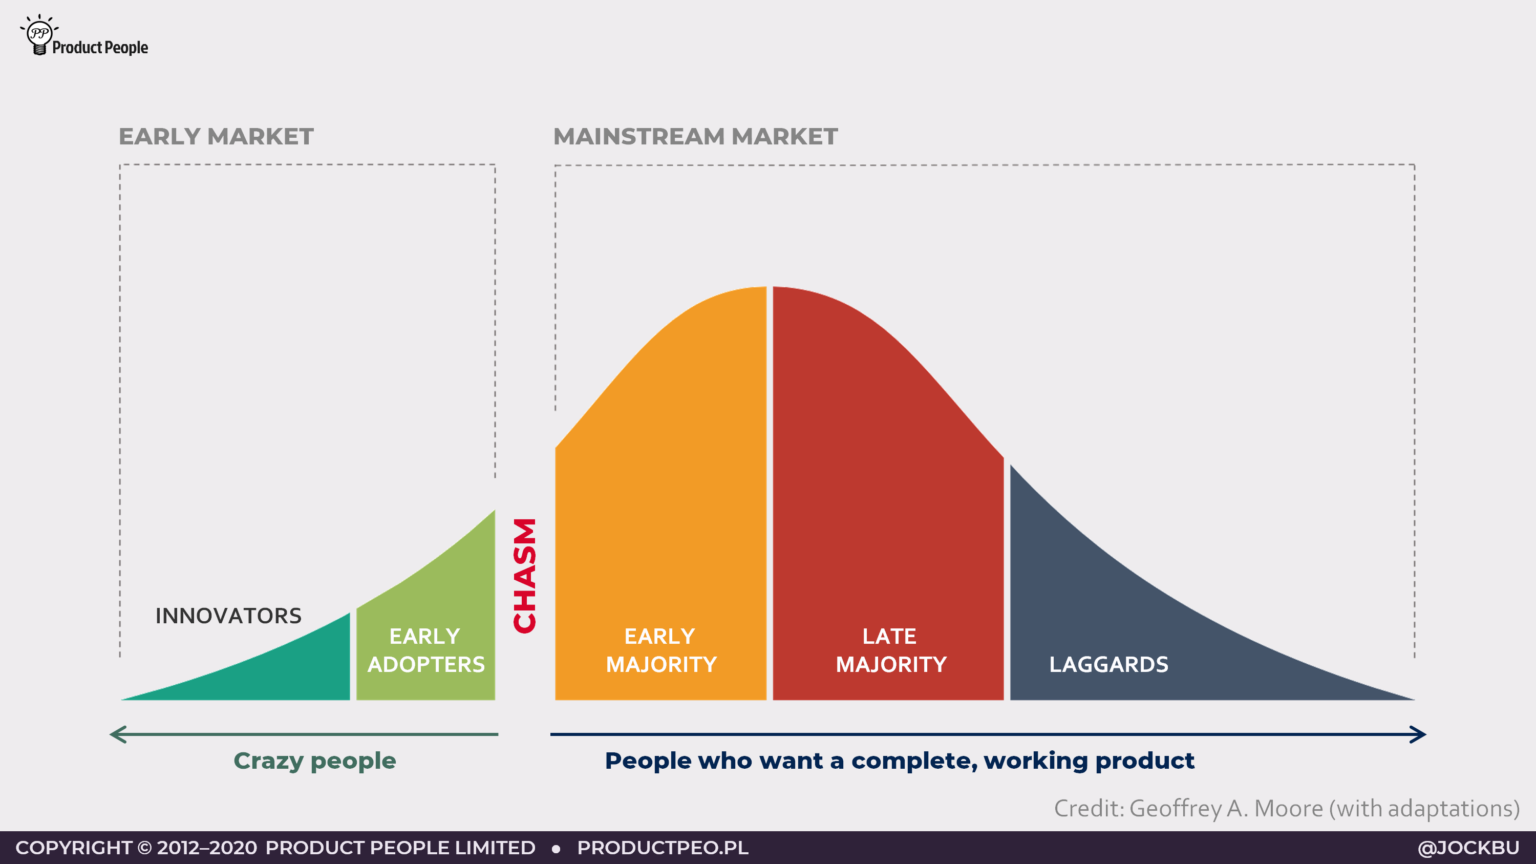 Crossing the chasm – the six stages of product adoption (Credit Geoffrey Moore, with adaptions)